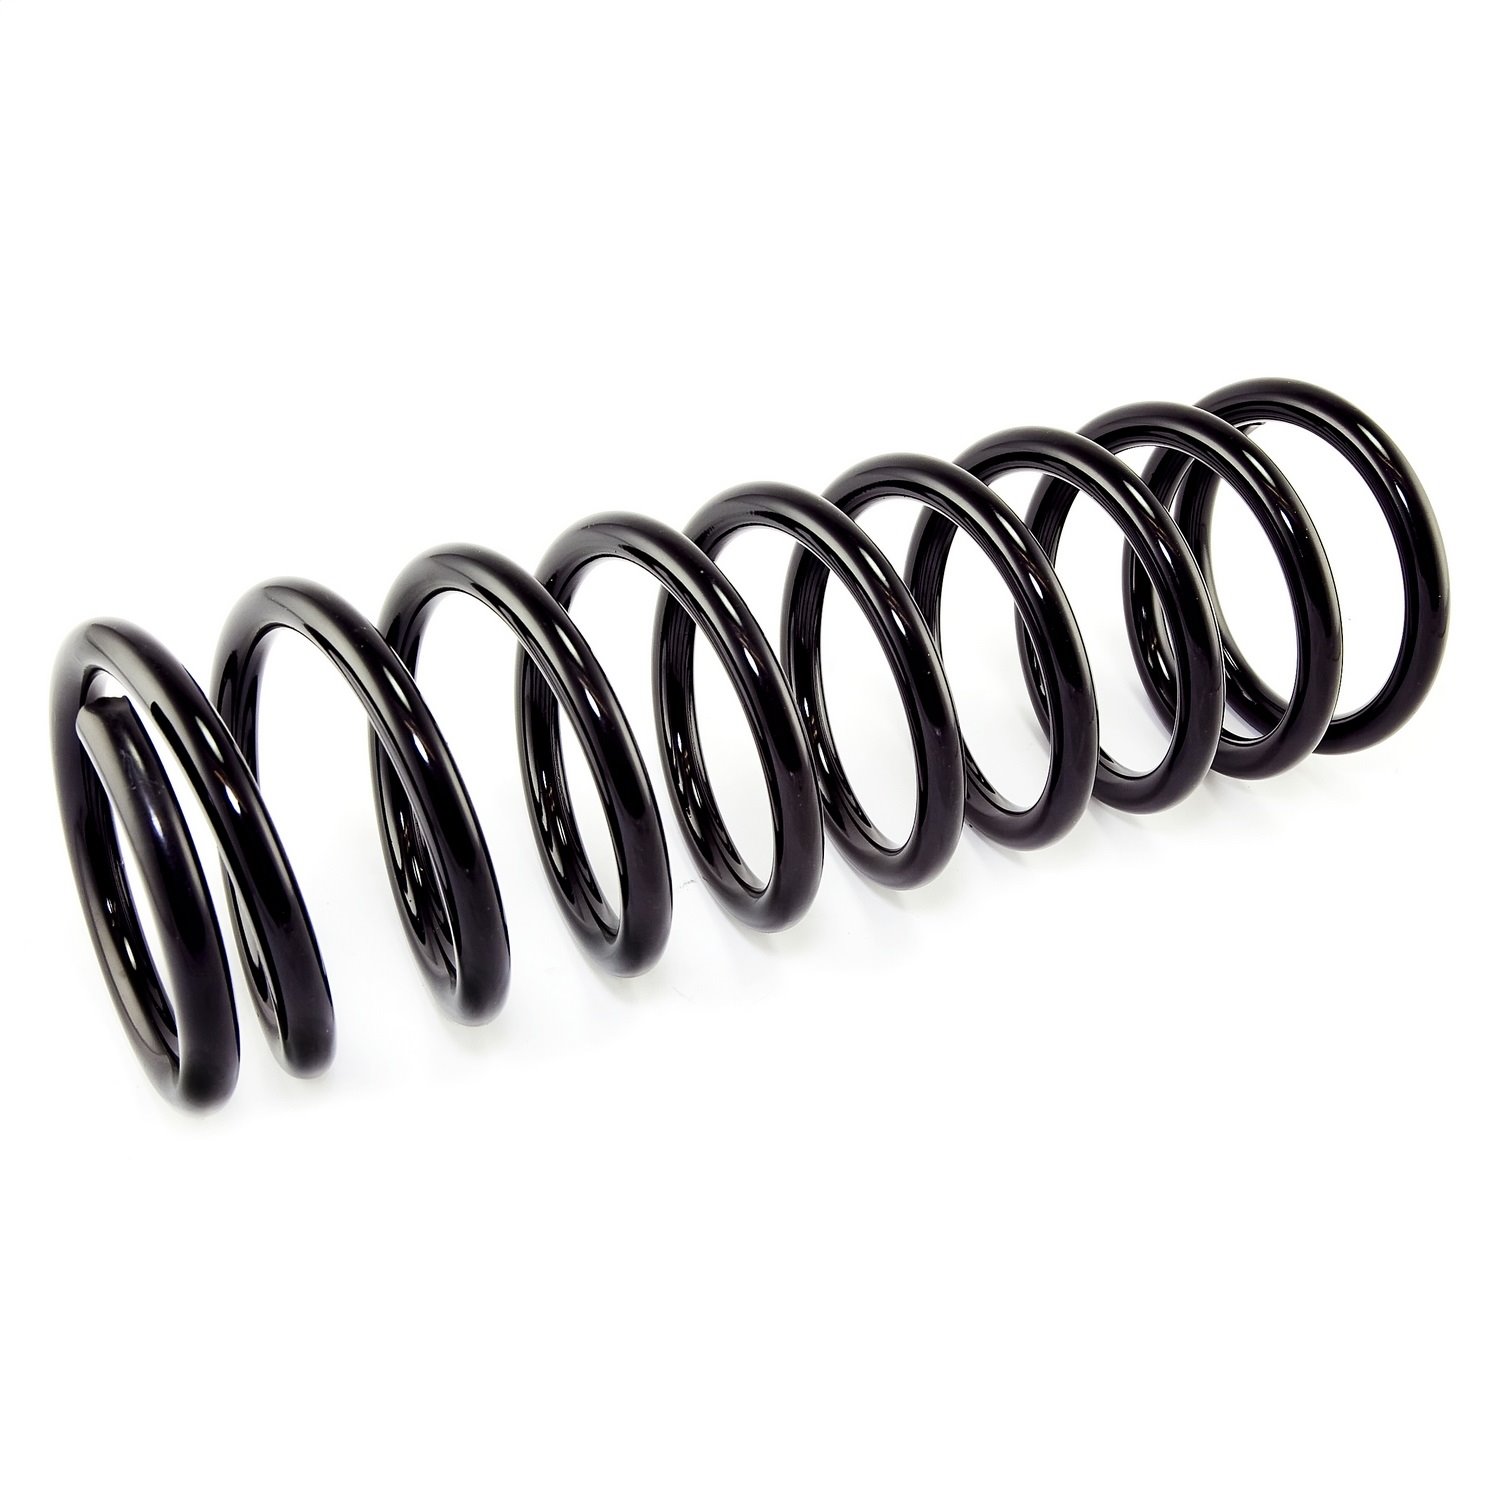 Stock replacement front coil spring from Omix-ADA, Fits